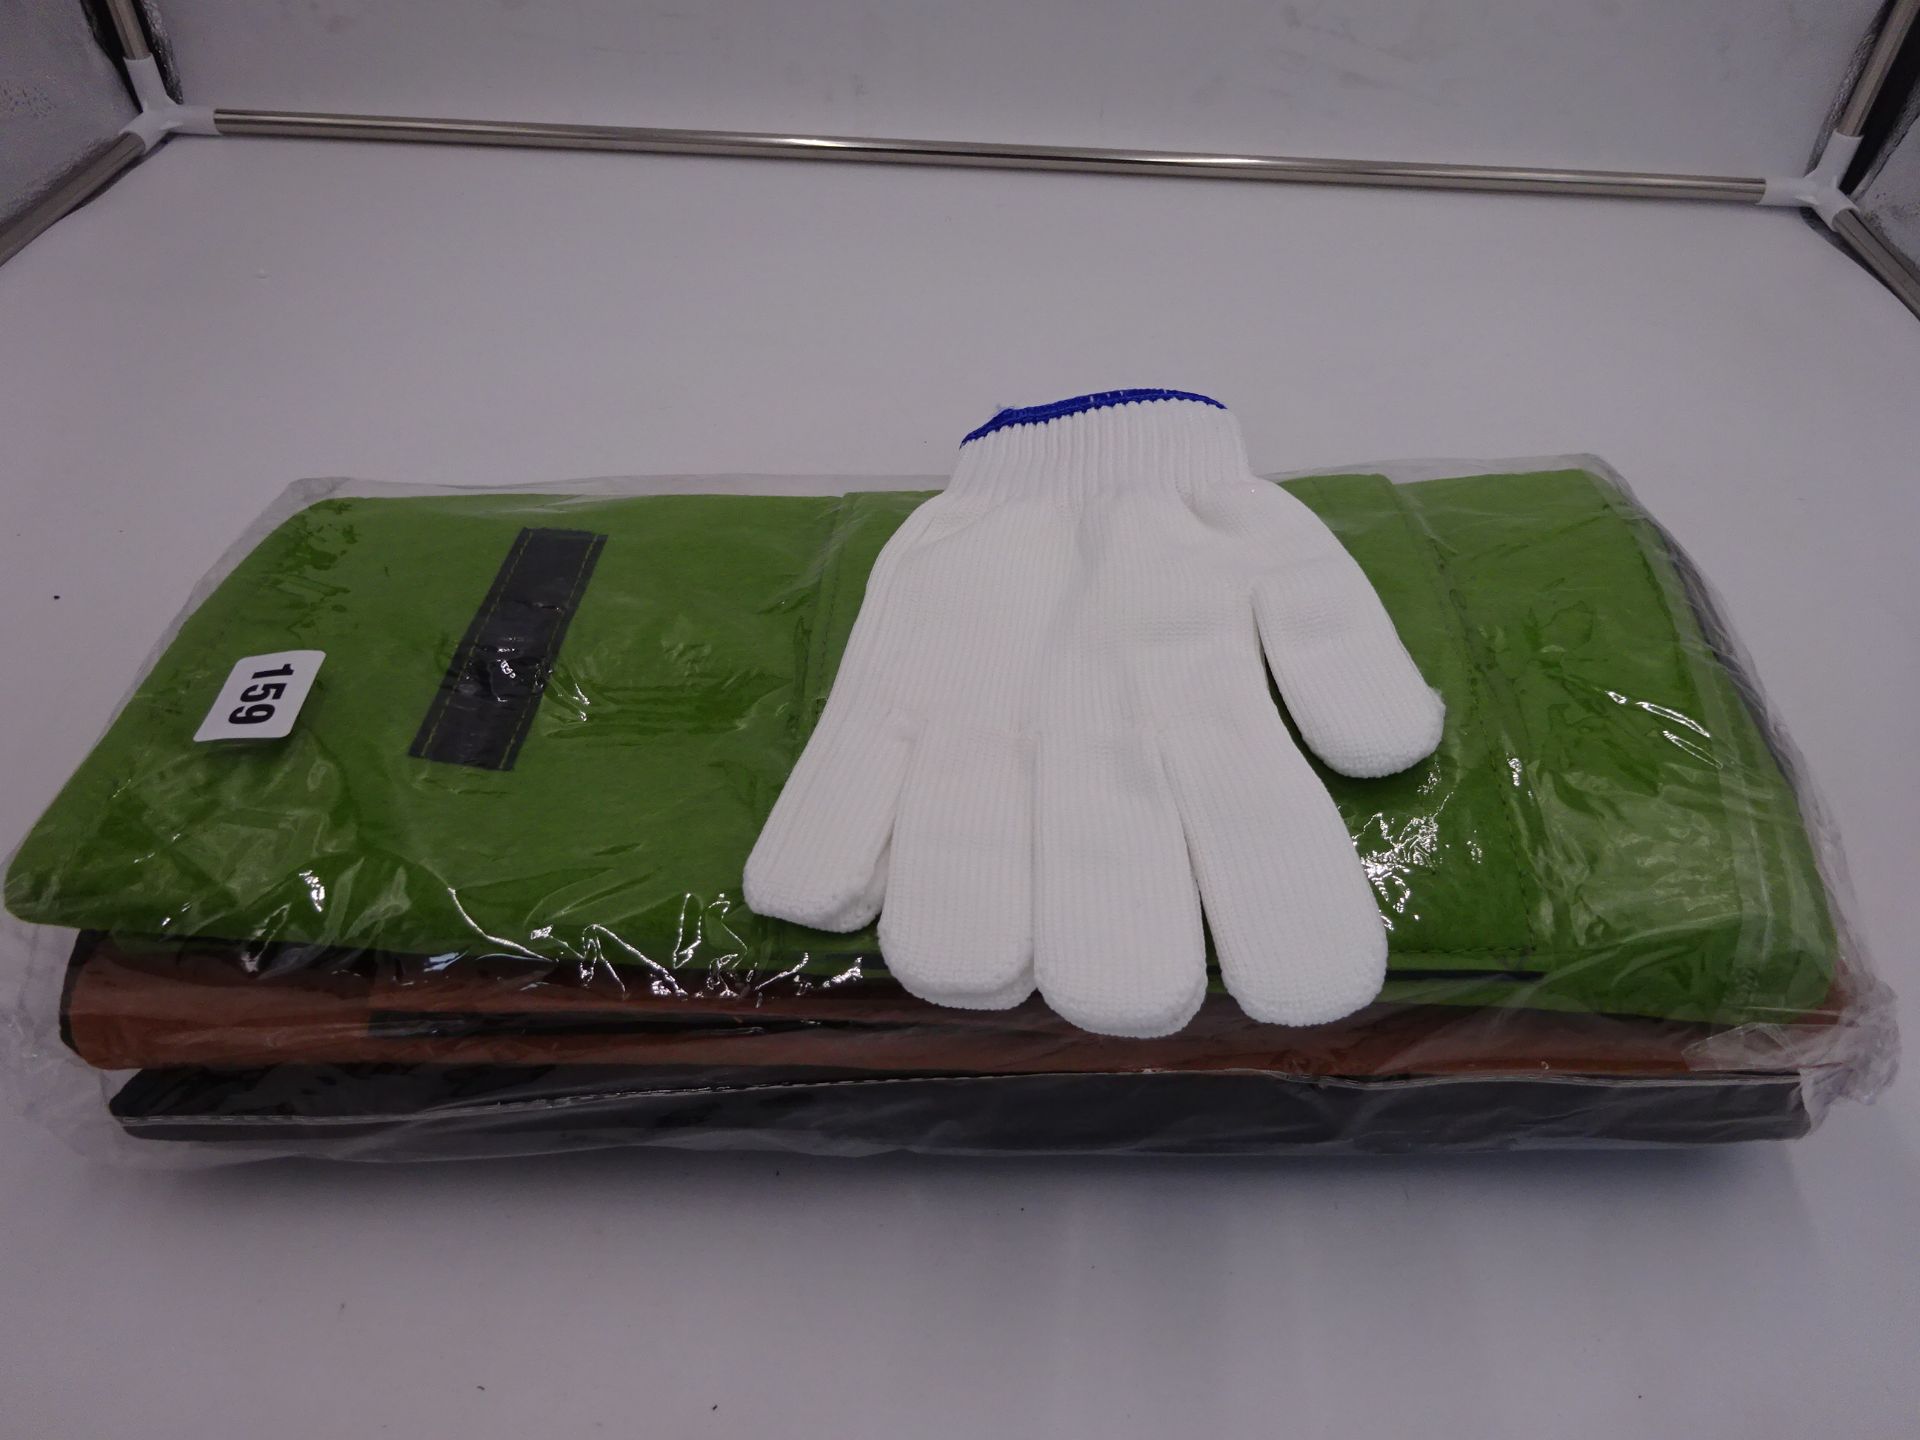 NEW 3 PACK OF PLANT GROW BAGS WITH GLOVES